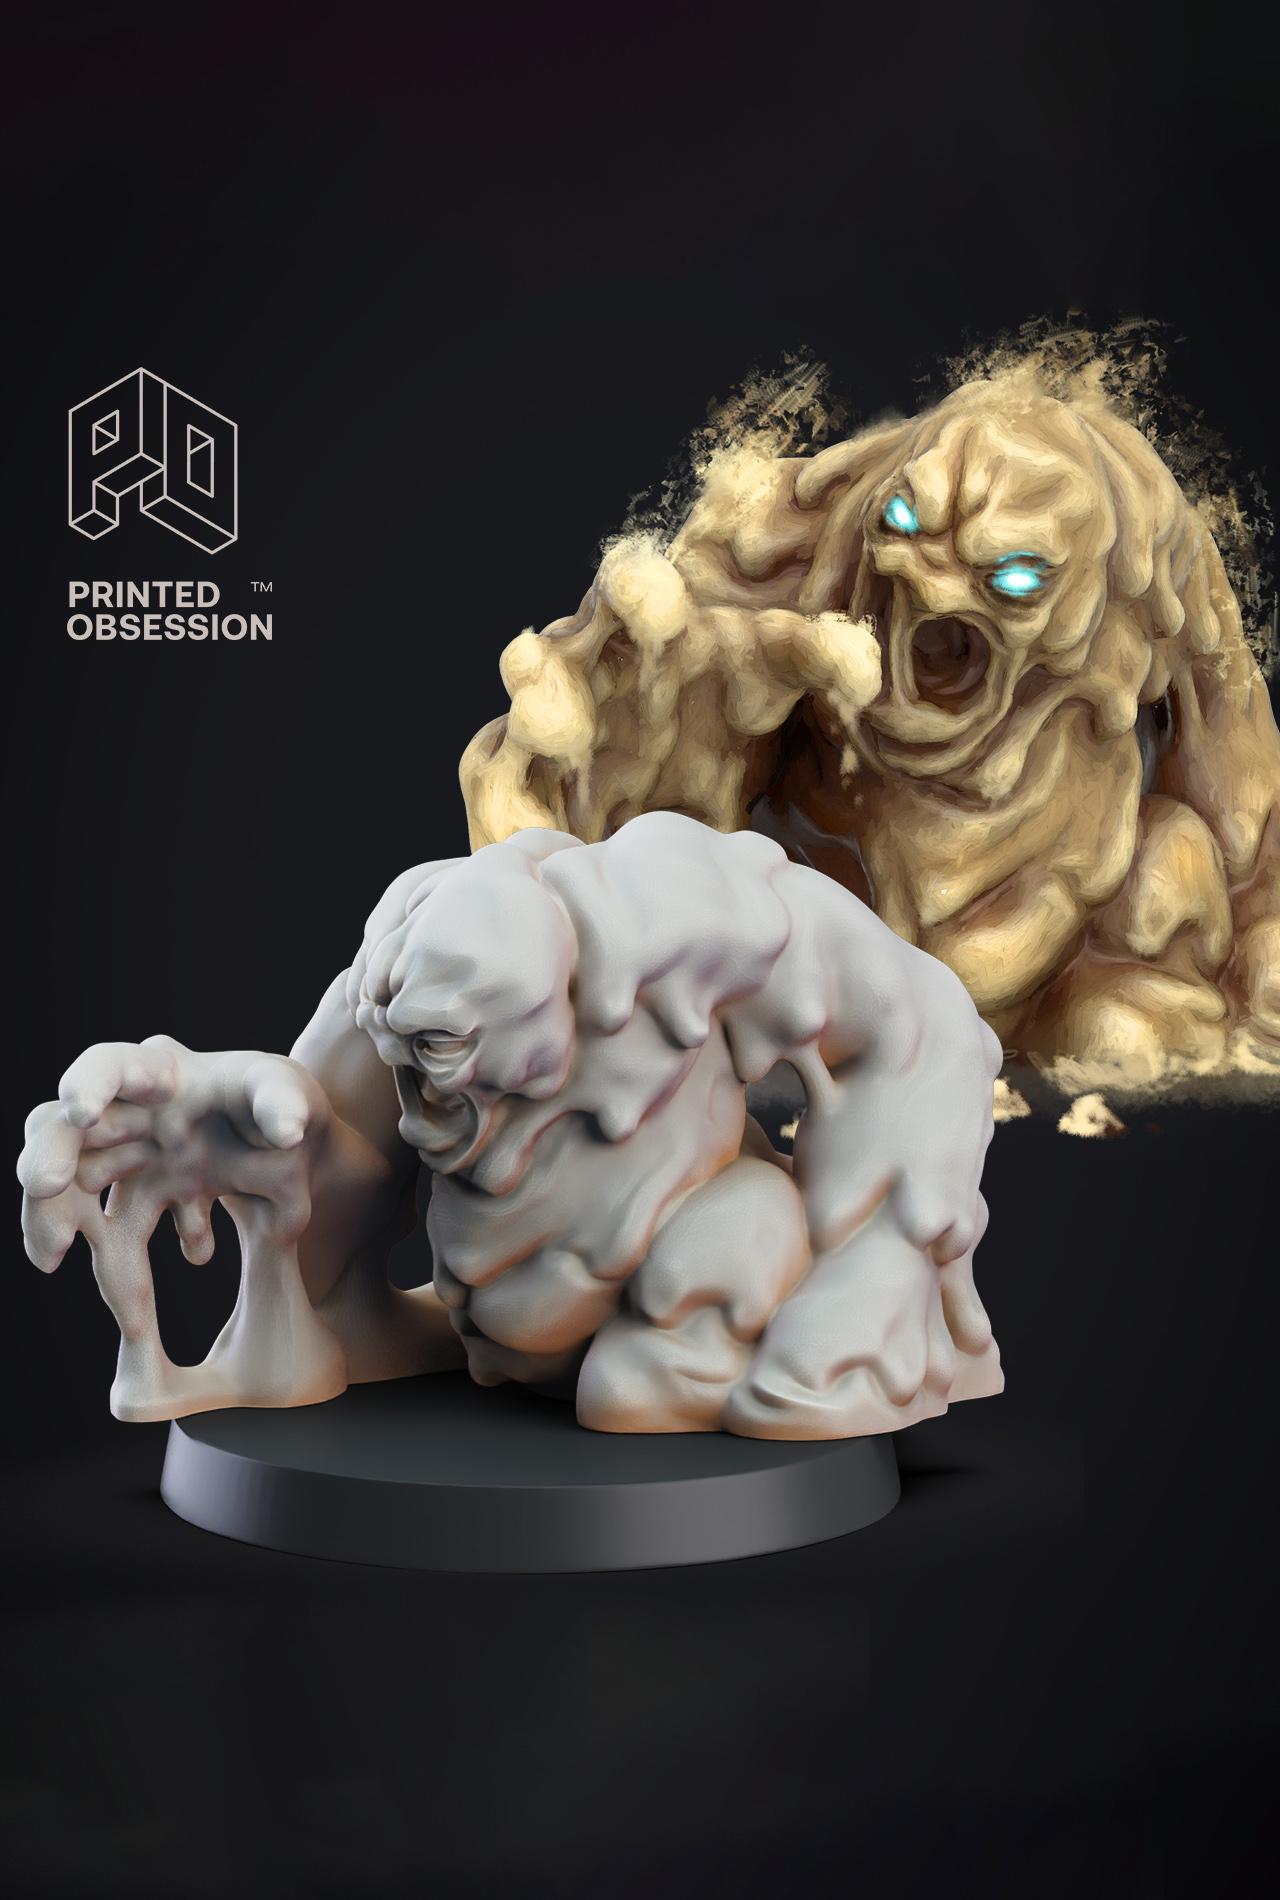 Golem Clay - Constructs - PRESUPPORTED - Illustrated and Stats - 32mm scale			 3d model